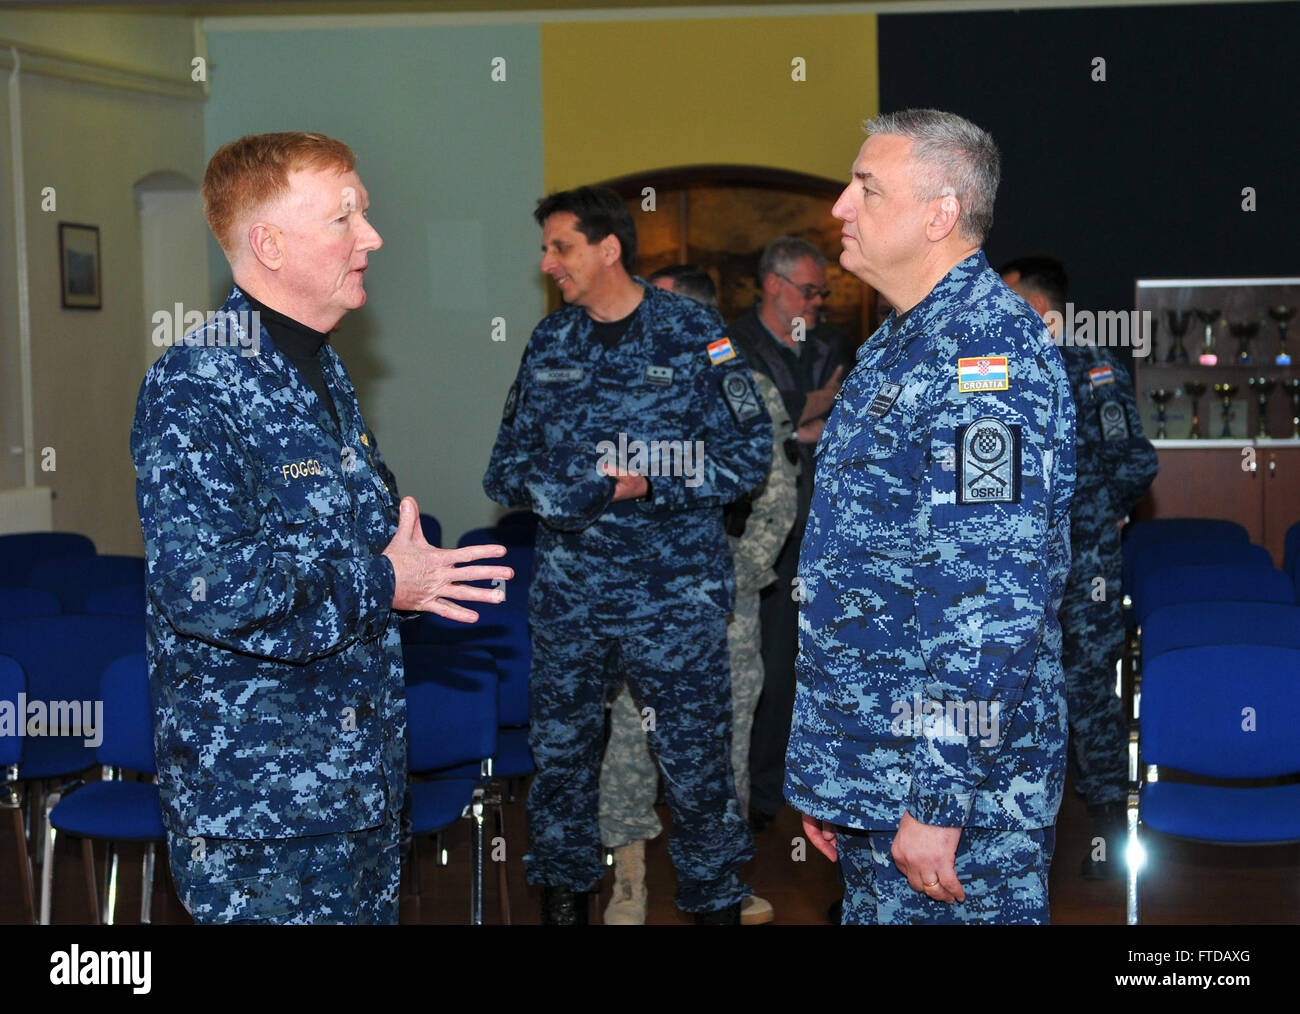 150331-N-VY489-079 RIJEKA, Croatia (March 31, 2015) Commander, U.S. 6th Fleet Vice Adm. James Foggo III, left, meets with Croatia Chief of Naval Operations, Commodore Predrag Stipanovic, during a tour of the Viktor Lenac Shipyard and USS Mount Whitney (LCC 20) March 31, 2015. Mount Whitney, forward deployed to Gaeta, Italy, is undergoing a regular maintenance period at the shipyard in Rijeka, Croatia and is scheduled to be in dry dock until mid-summer. (U.S. Navy photo by Mass Communication Specialist 2nd Class Mike Wright/Released) Stock Photo